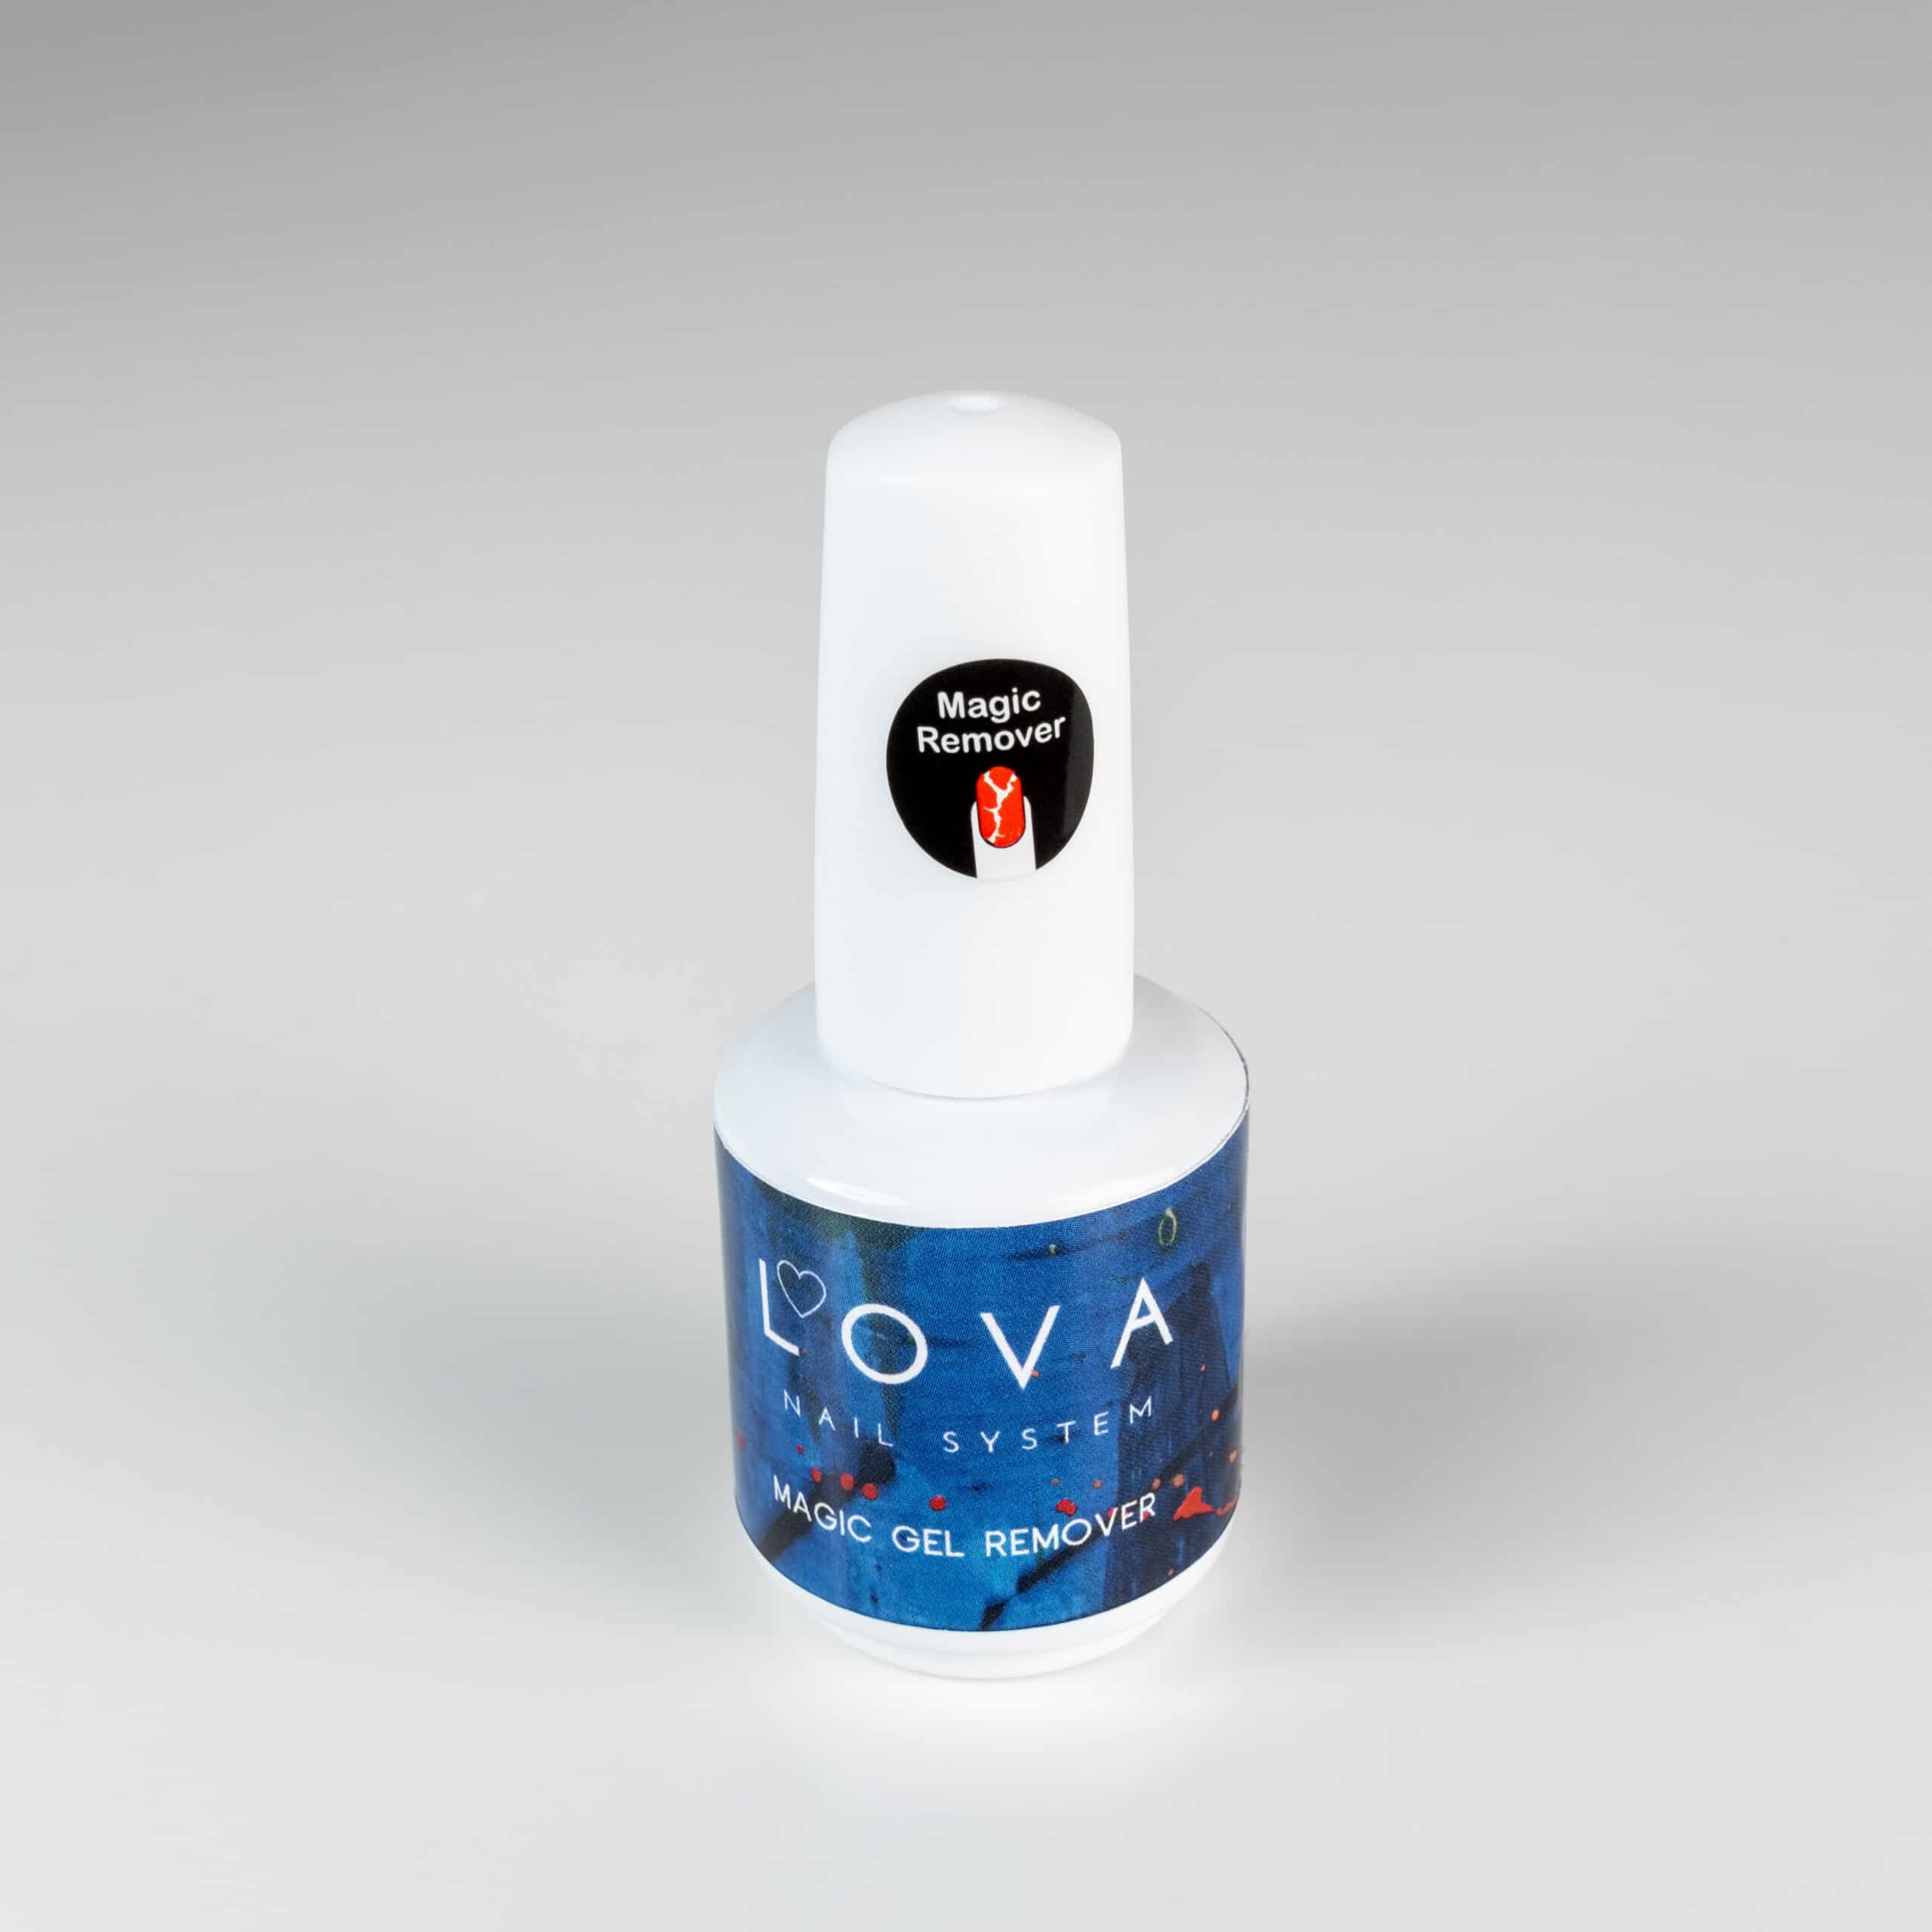 Magic Gel Remover - Pour ongles - Lova Nail System